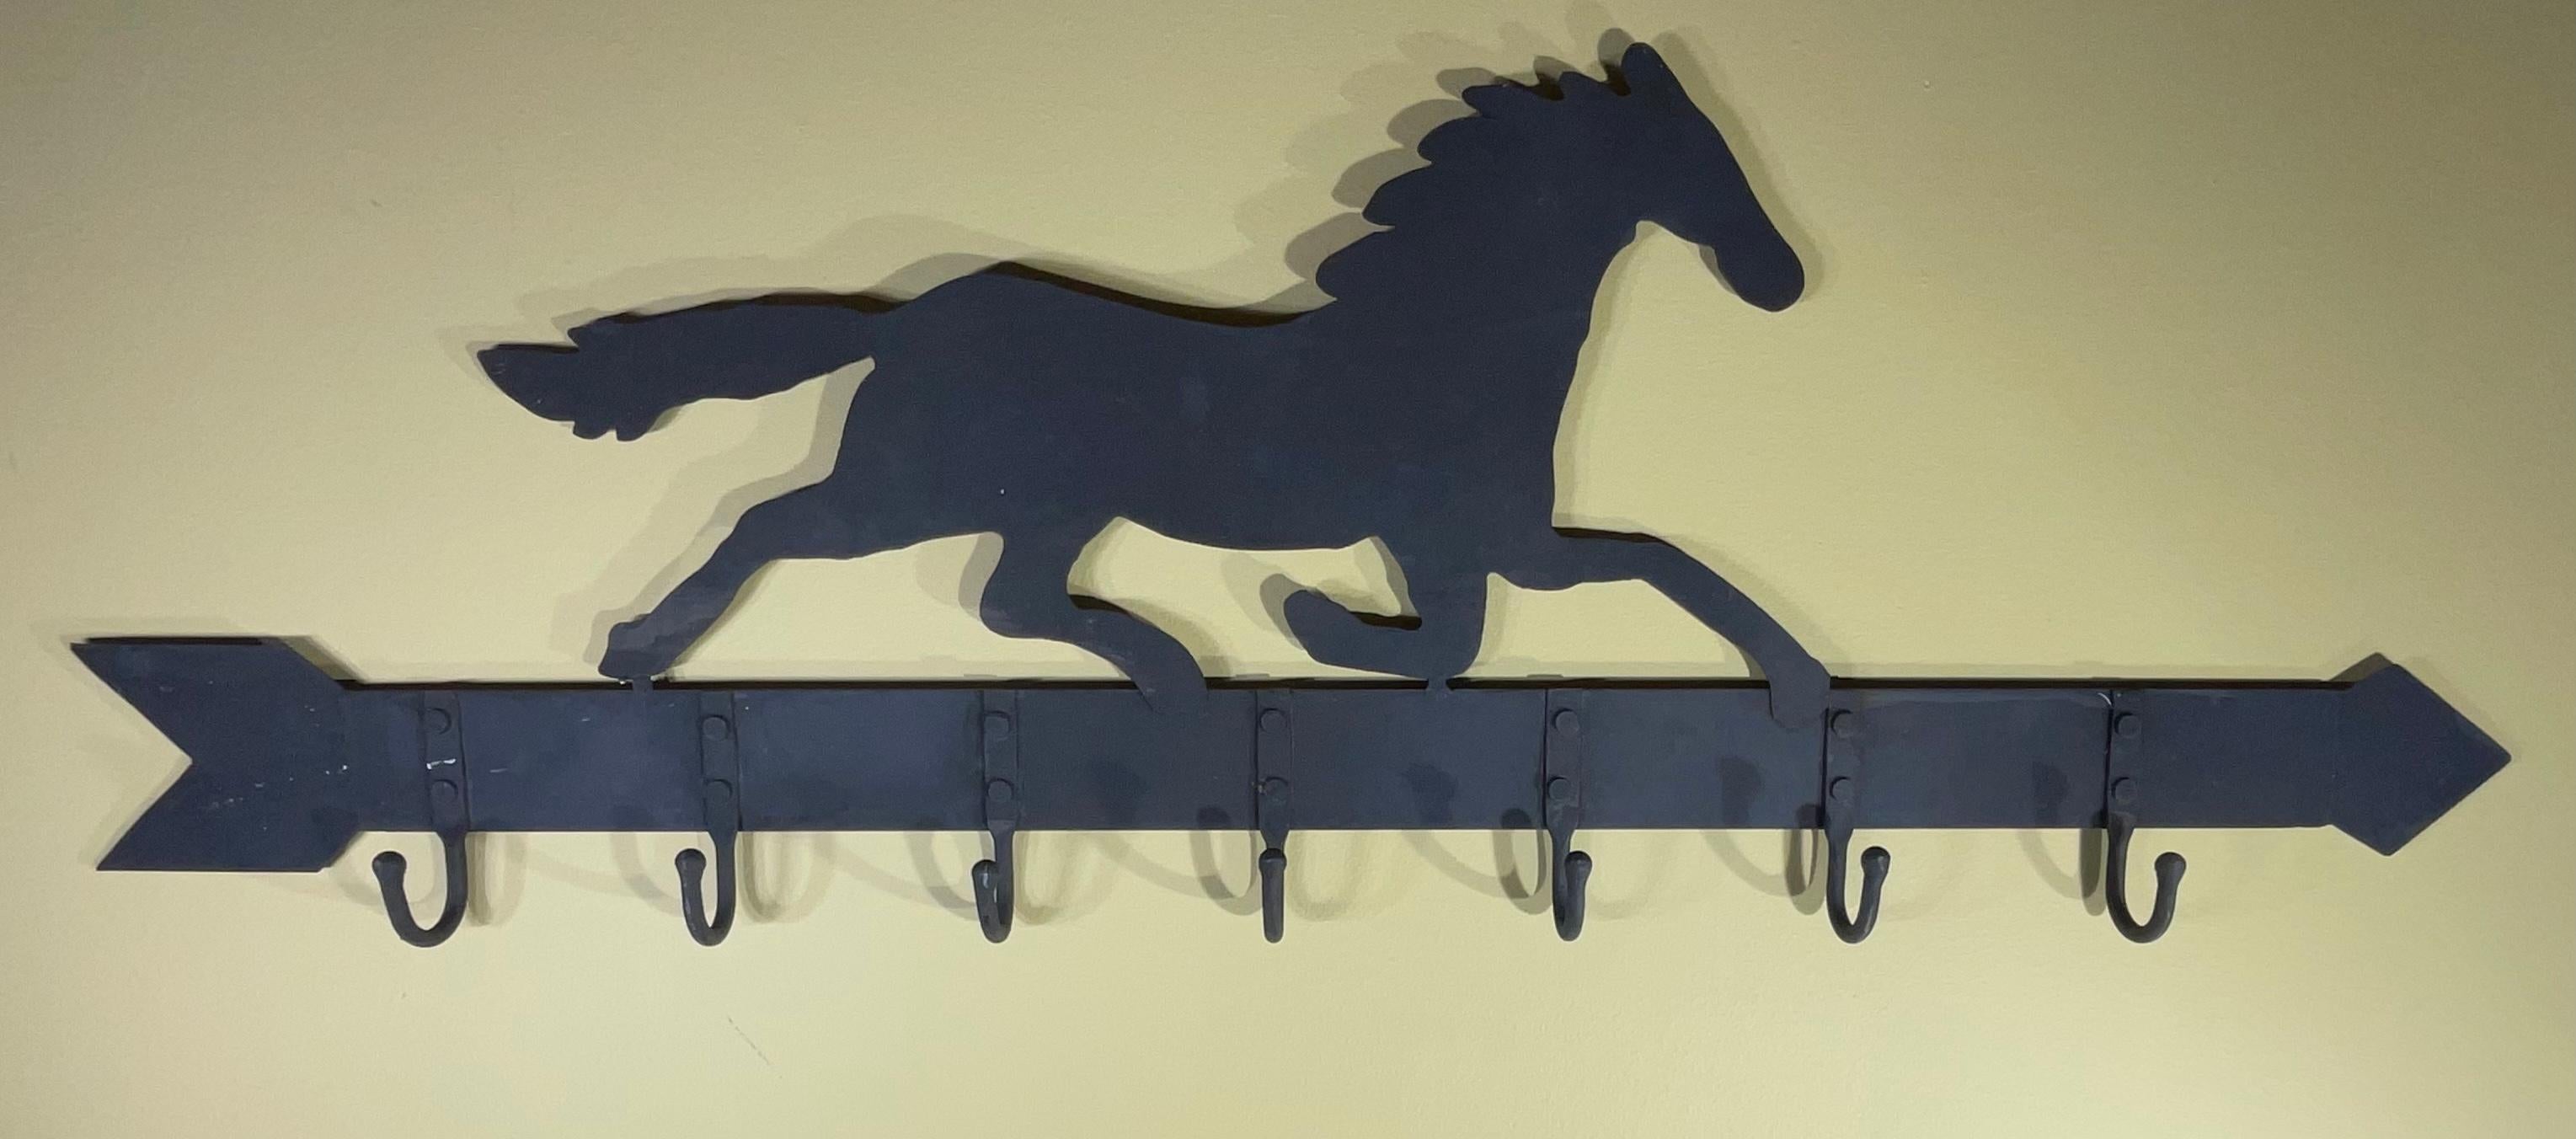 Hand-Crafted Artistic Equestrian Metal Sculpture or Wall Bracket For Sale